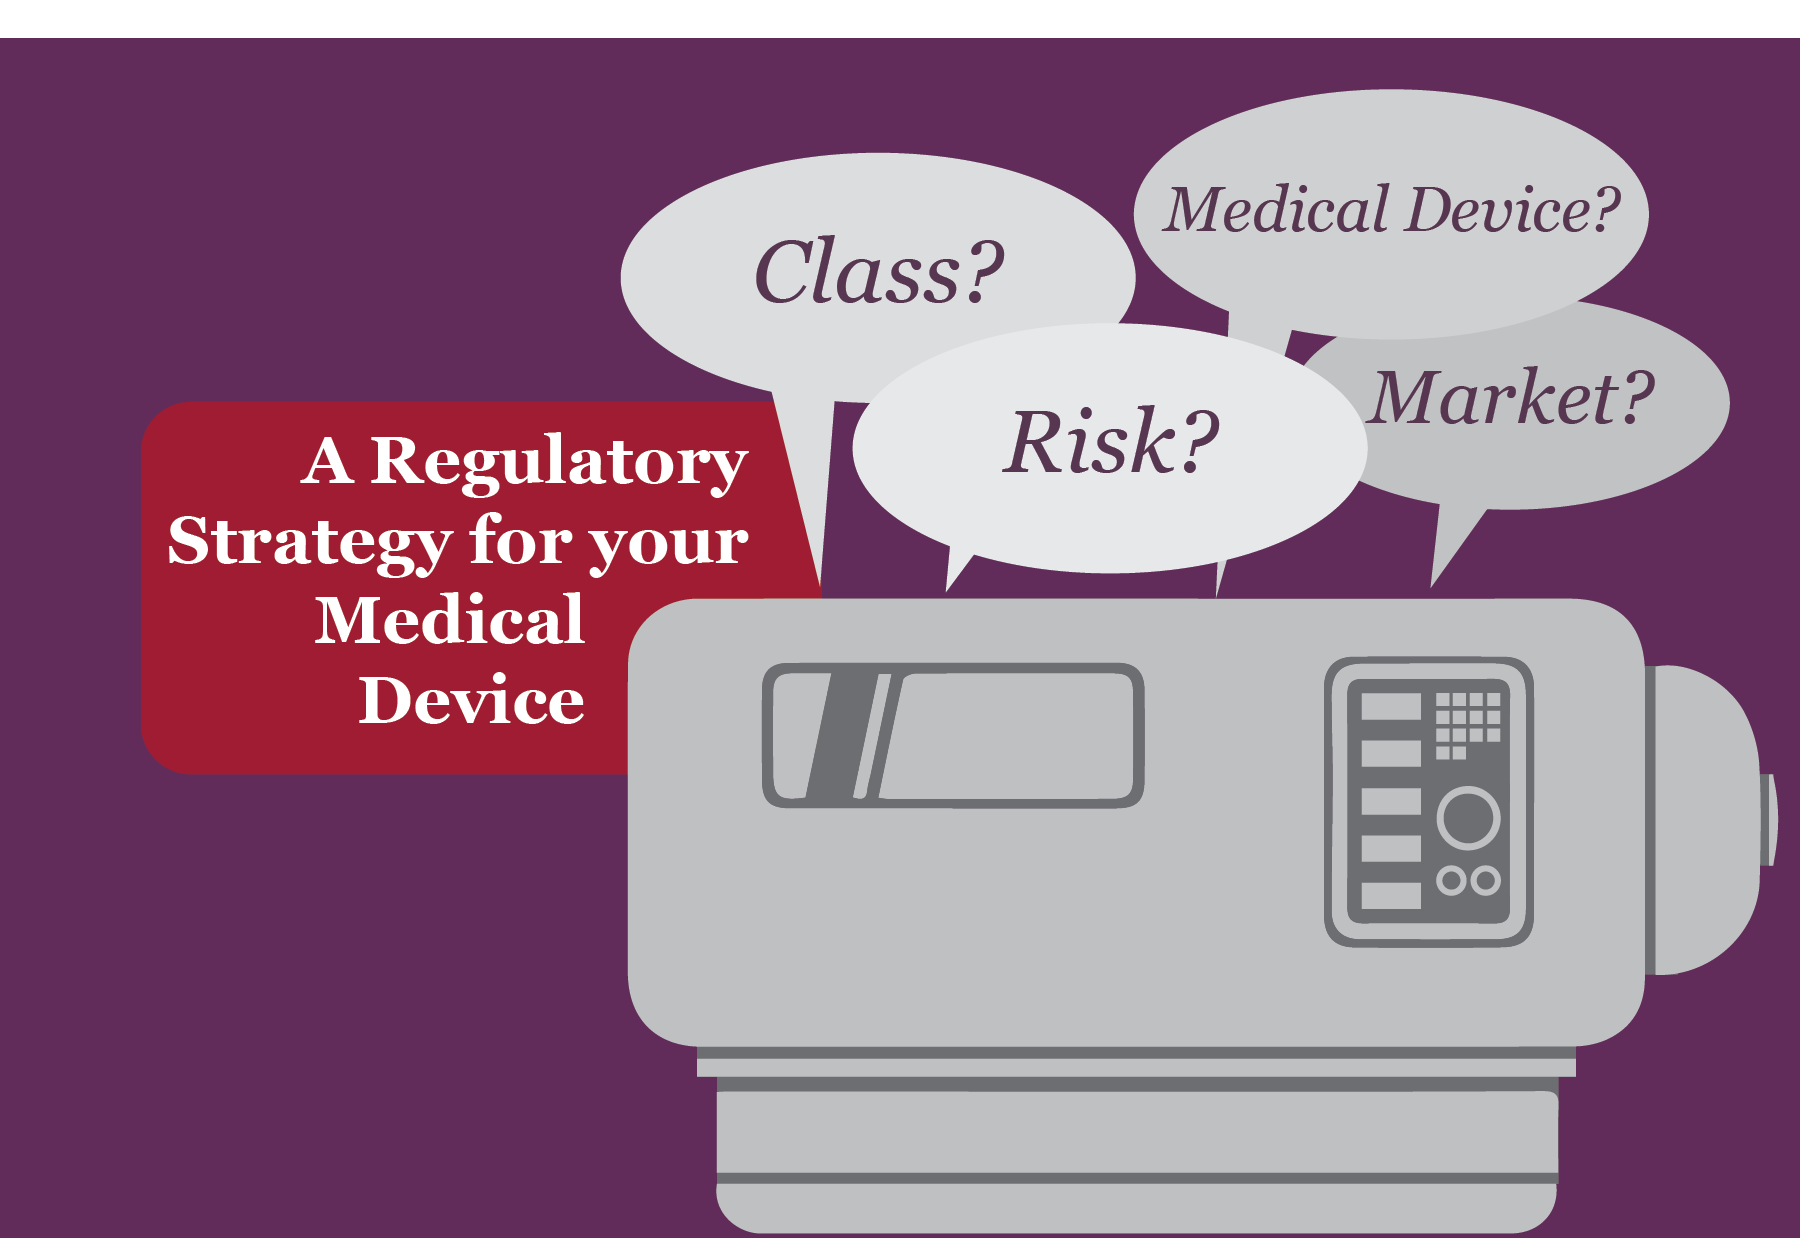 A Regulatory Strategy for your Medical Device